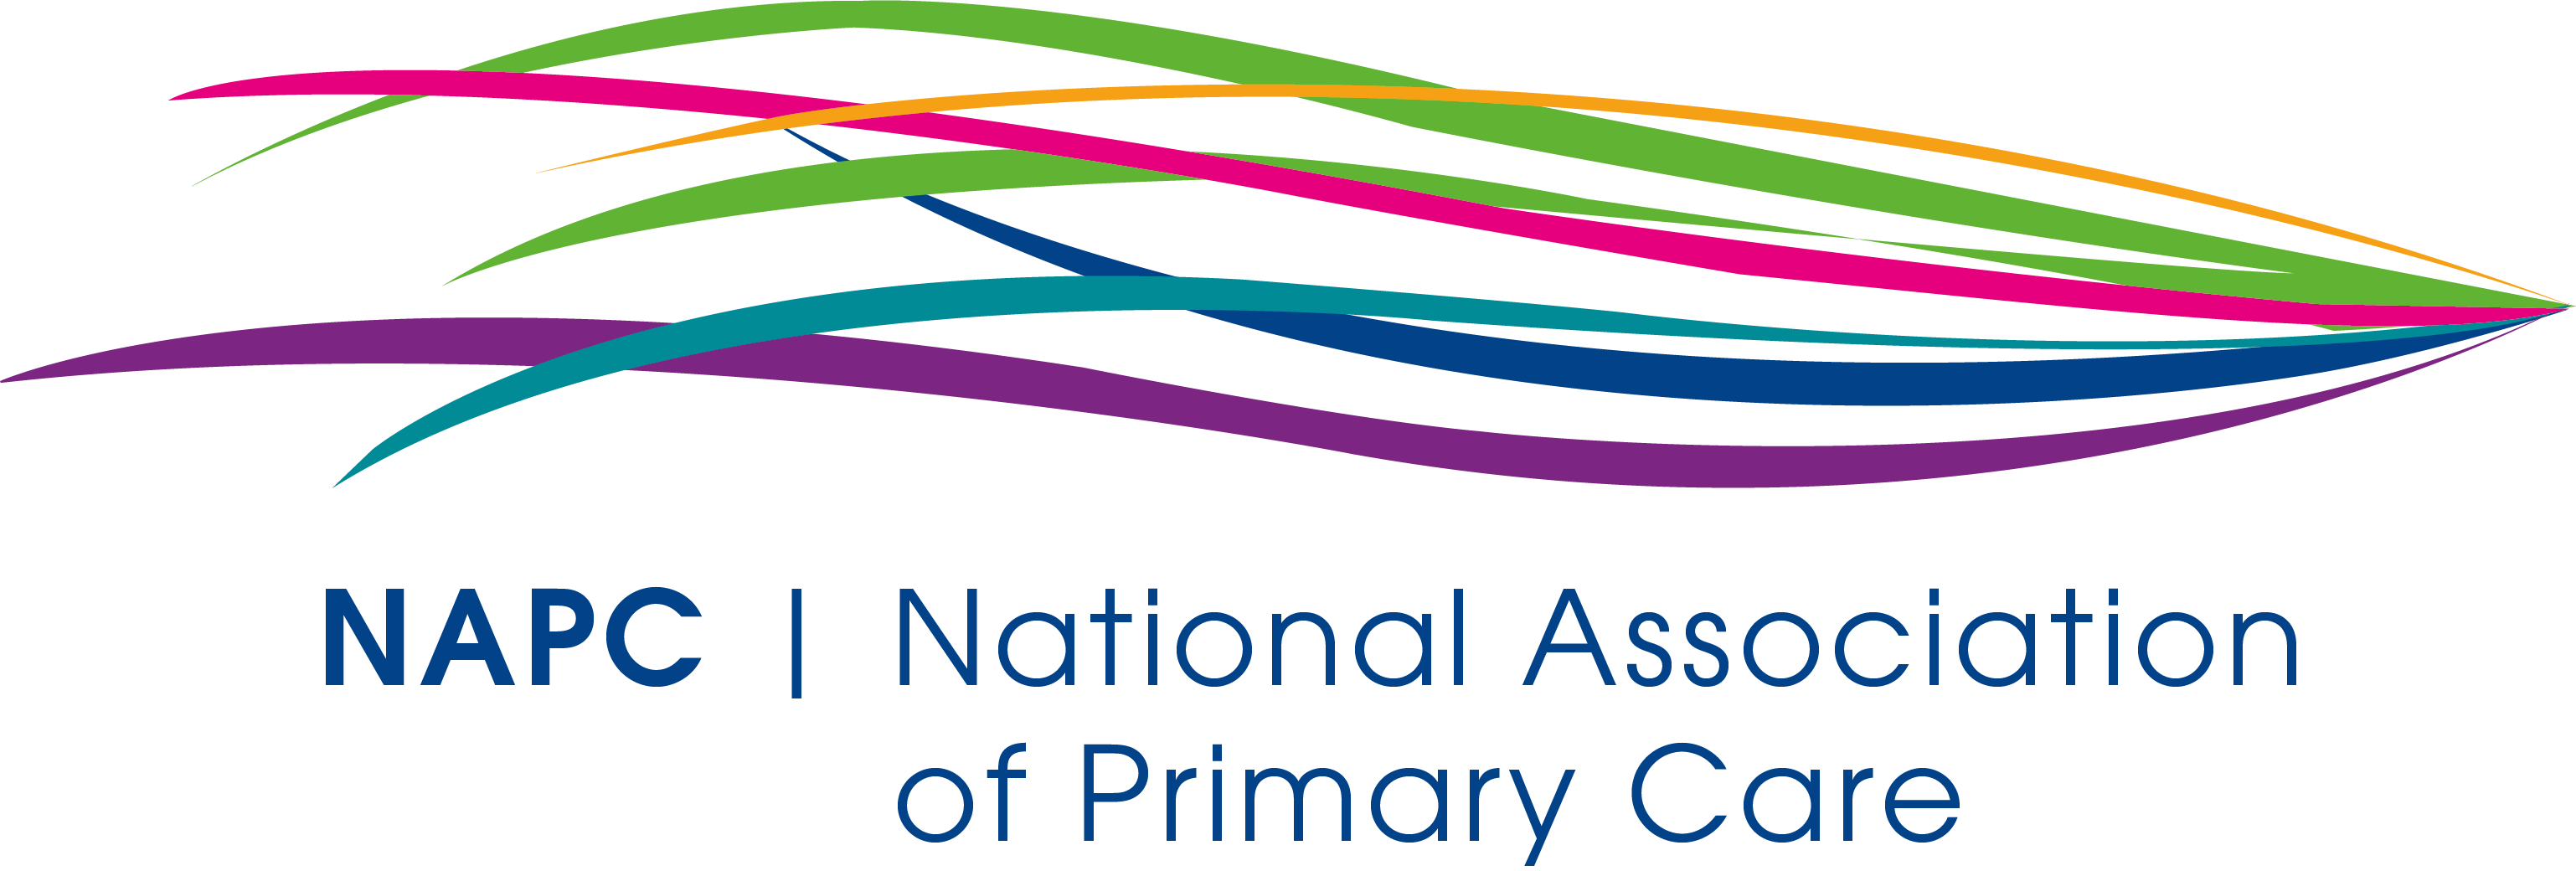 National Association of Primary Care